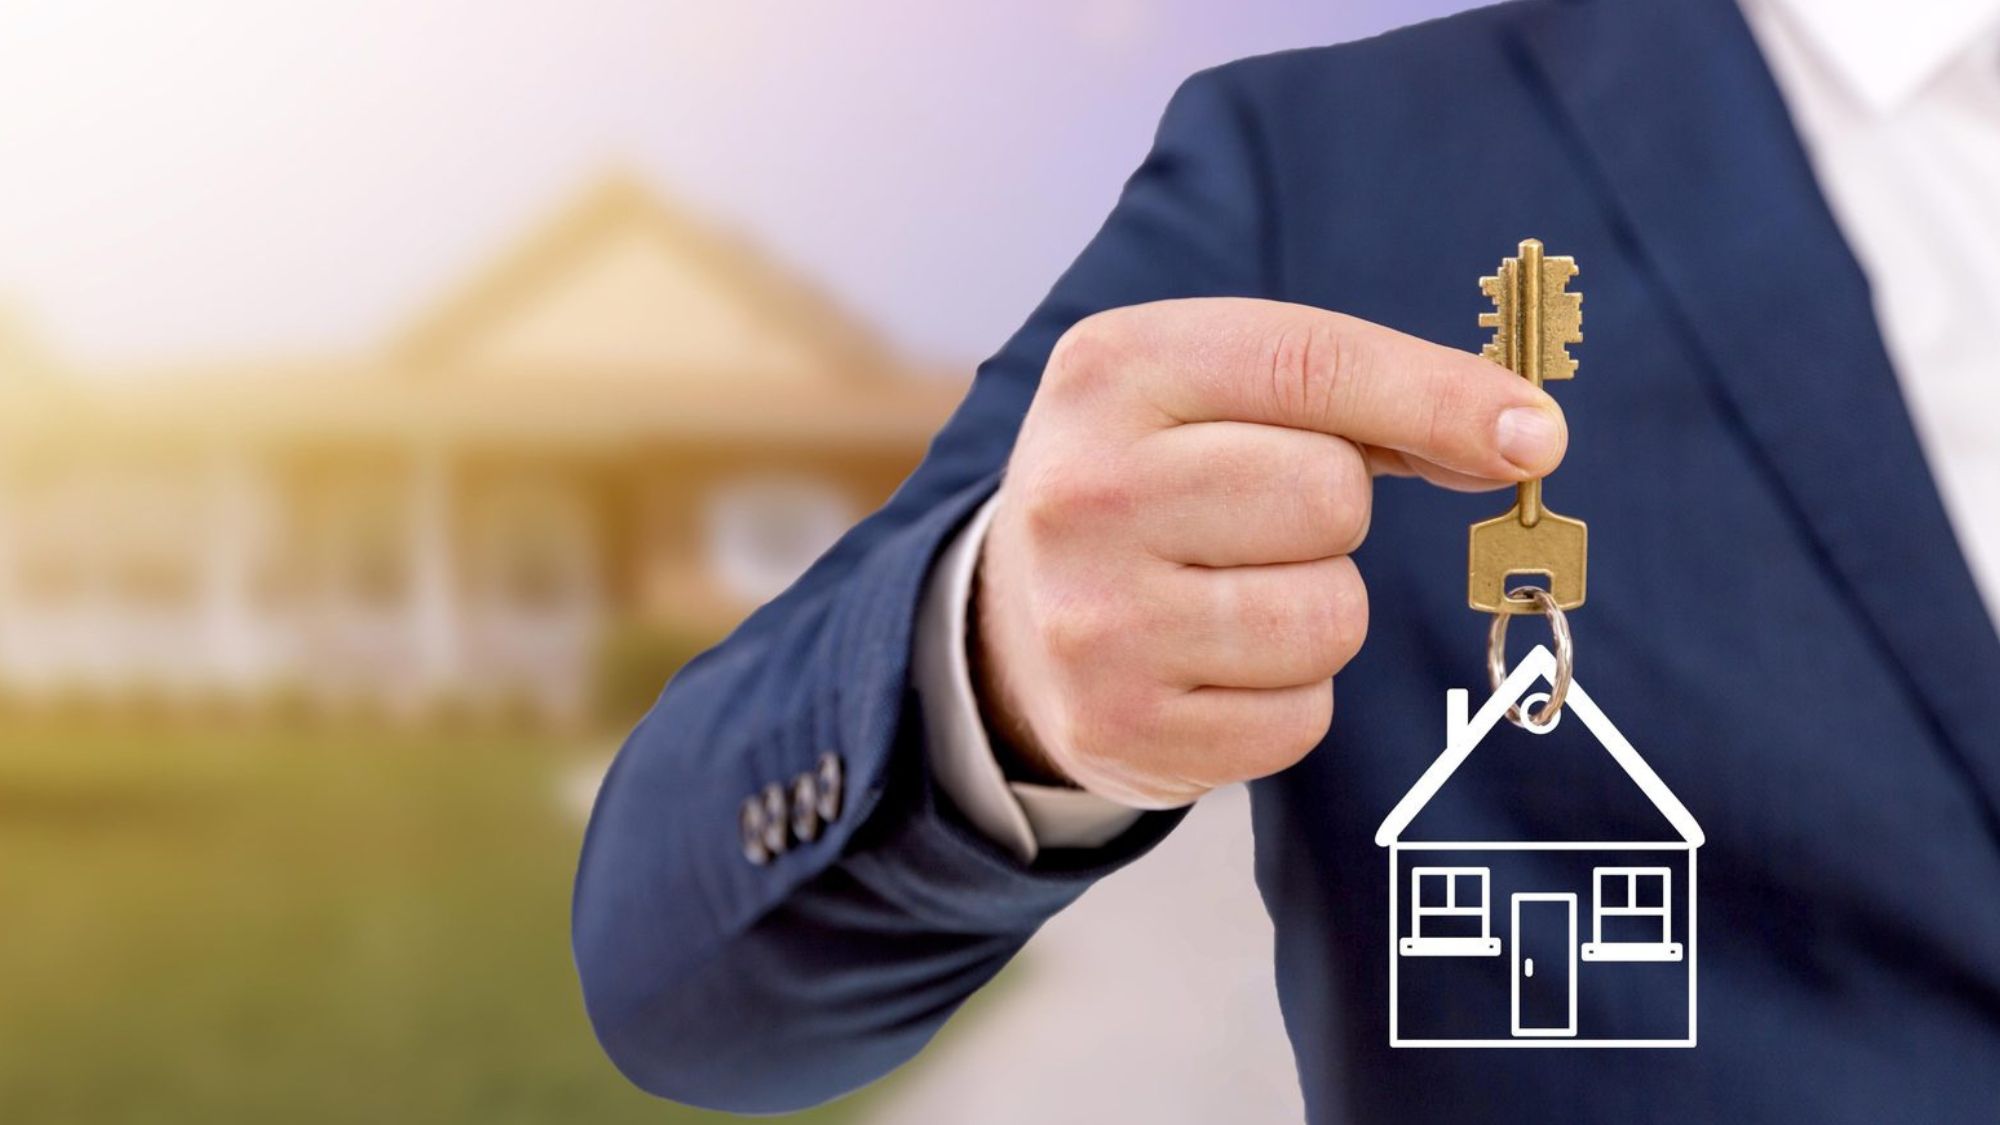 A man in a suit holding a key to a house, symbolizing the importance of buying property through real estate agencies